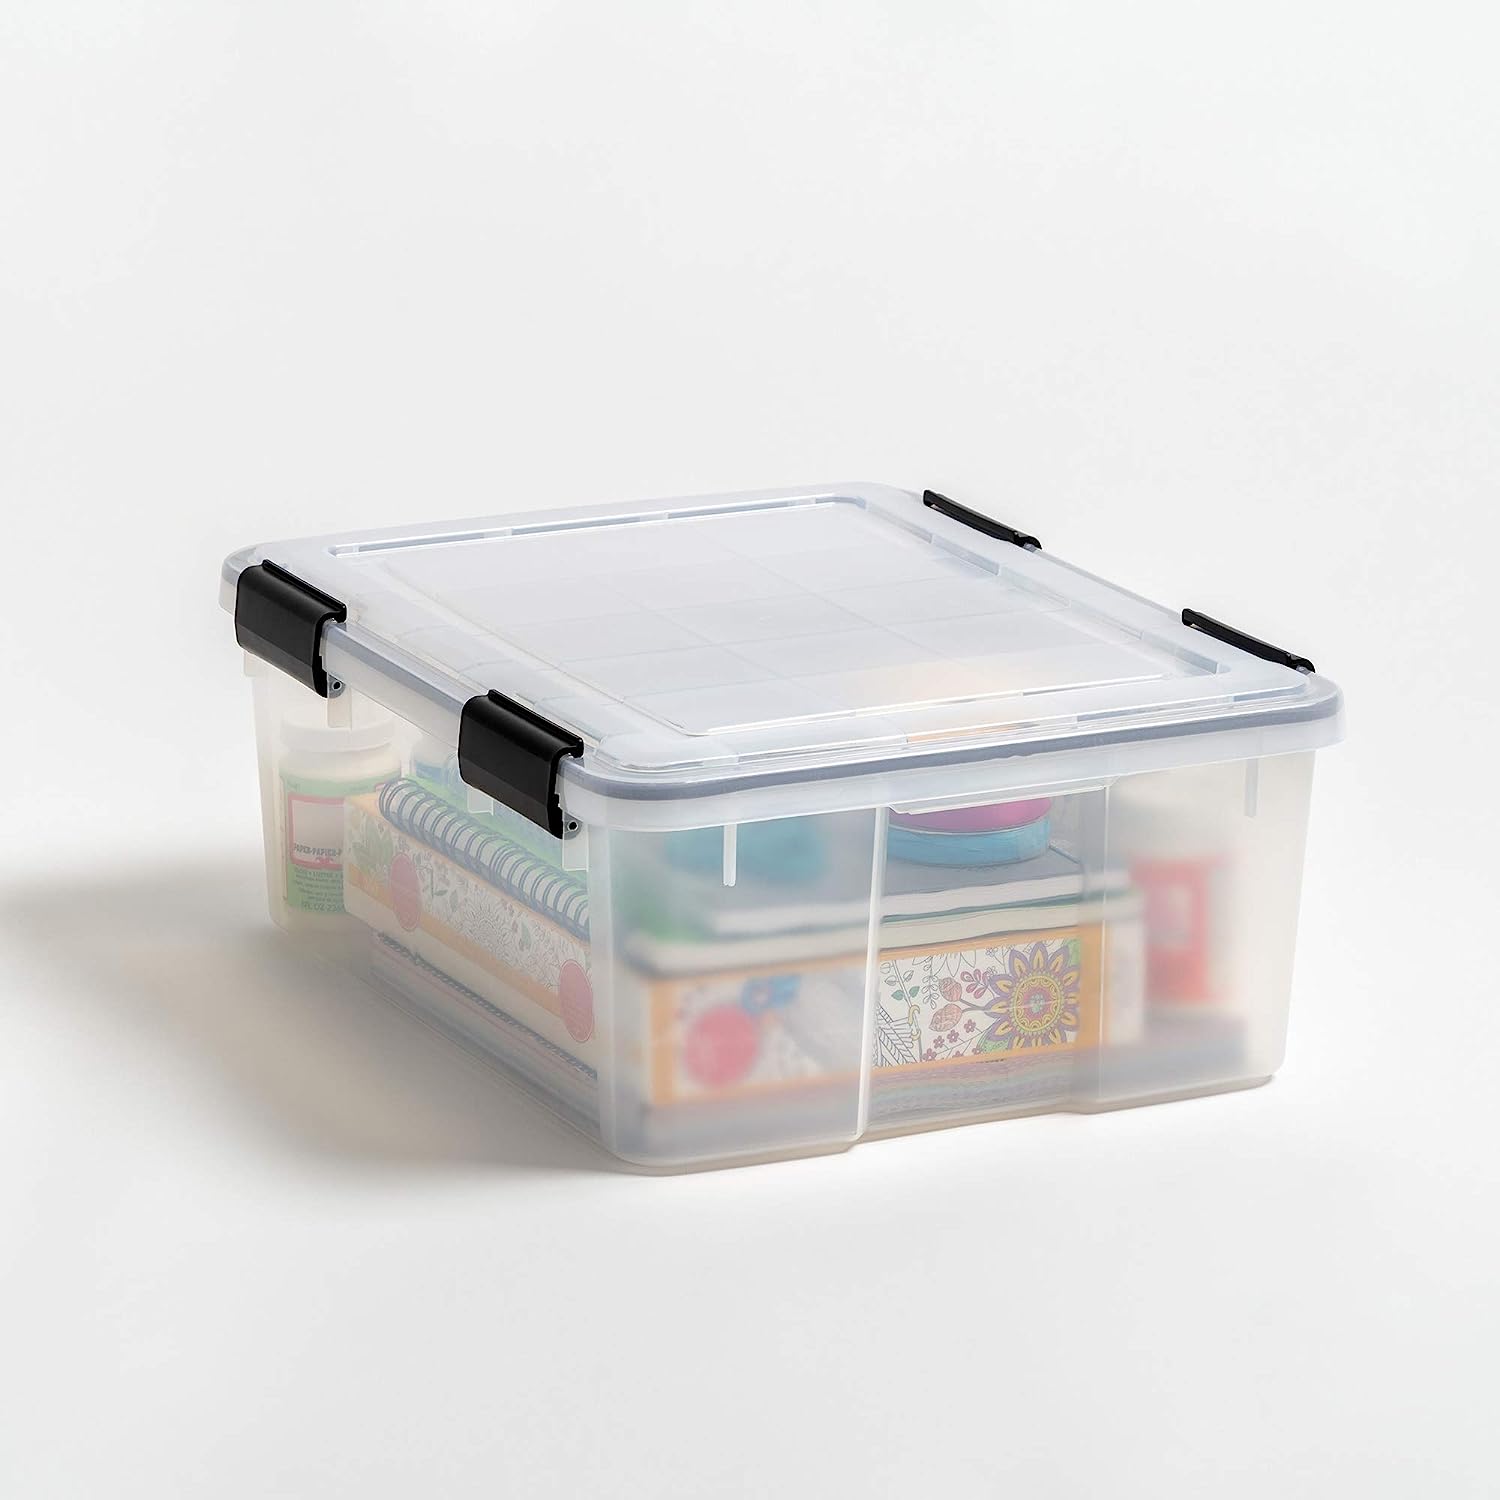 https://bigbigmart.com/wp-content/uploads/2023/06/IRIS-USA-30.6-Quart-WEATHERPRO-Plastic-Storage-Box-with-Durable-Lid-and-Seal-and-Secure-Latching-Buckles-Weathertight-Clear-with-Black-Buckles-6-Pack1.jpg